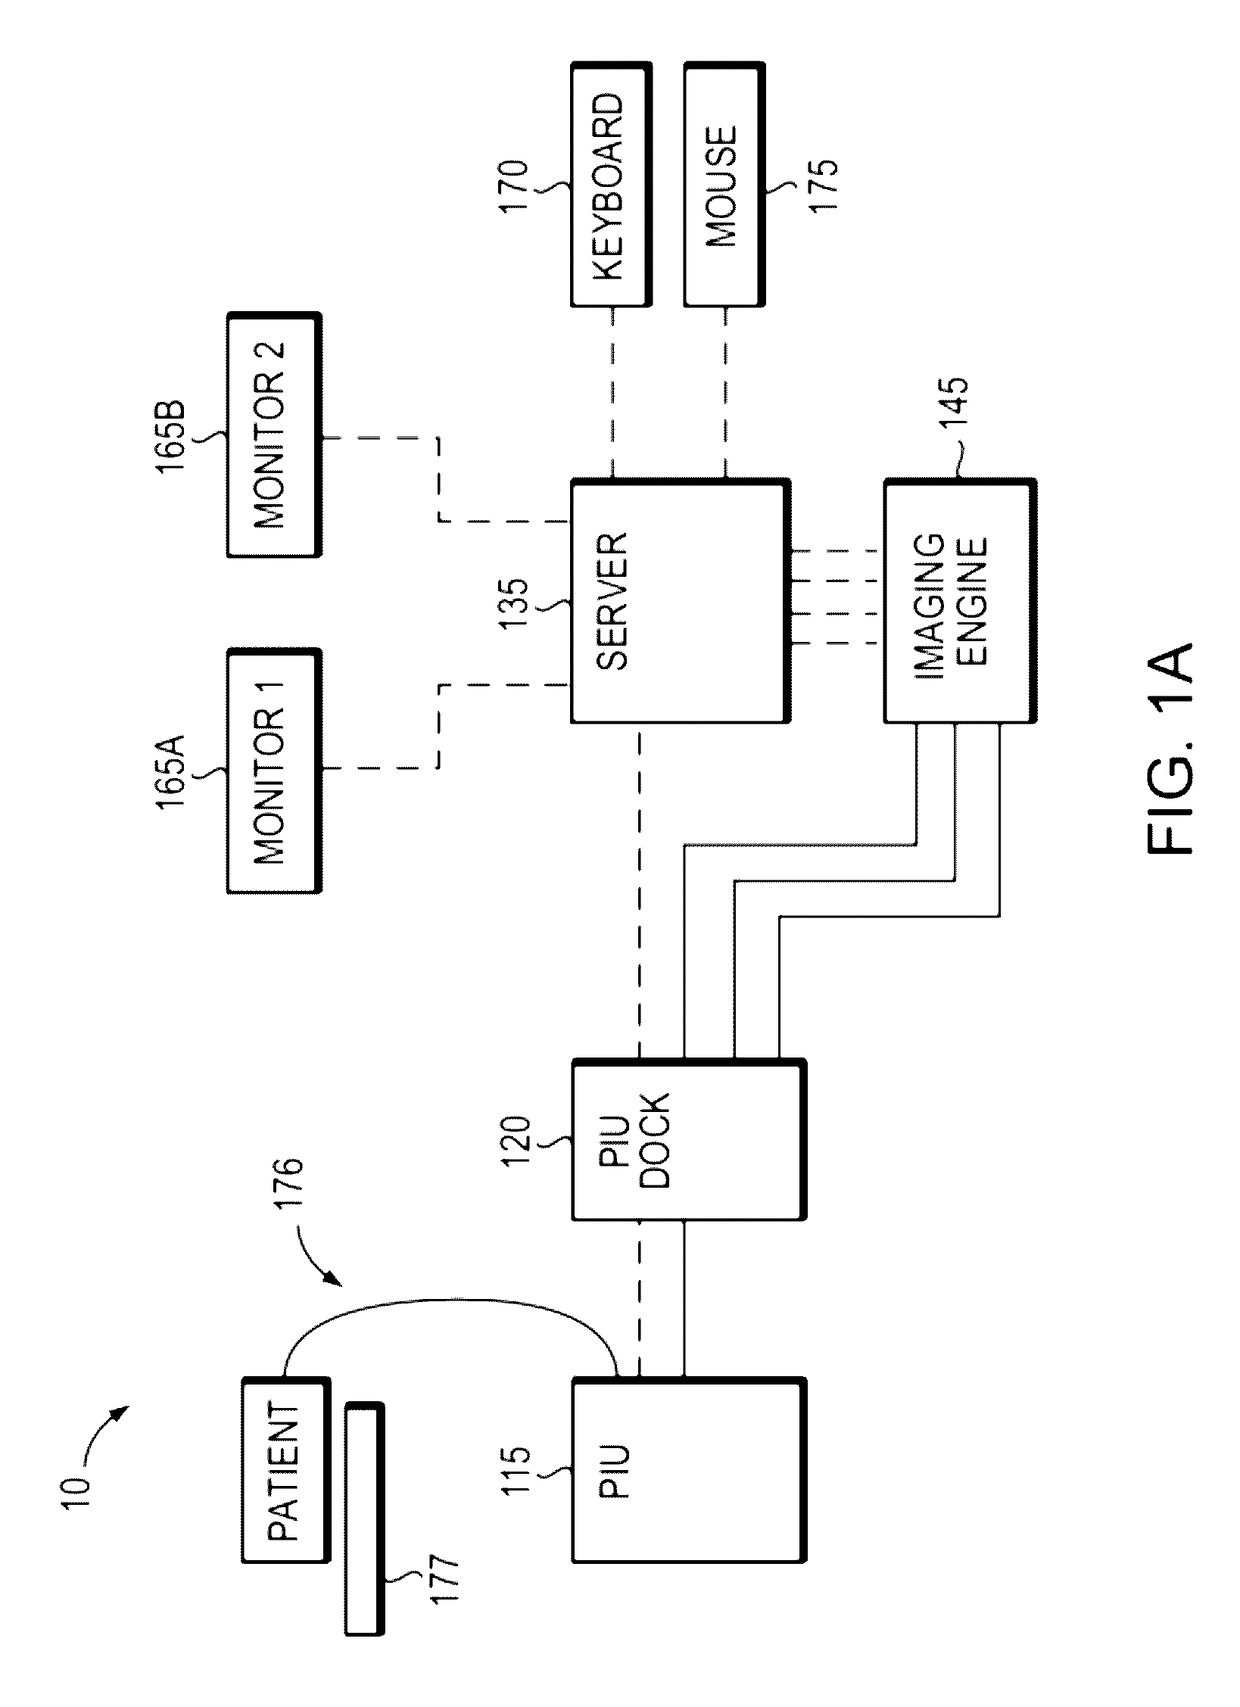 Multimodal imaging system, apparatus, and methods